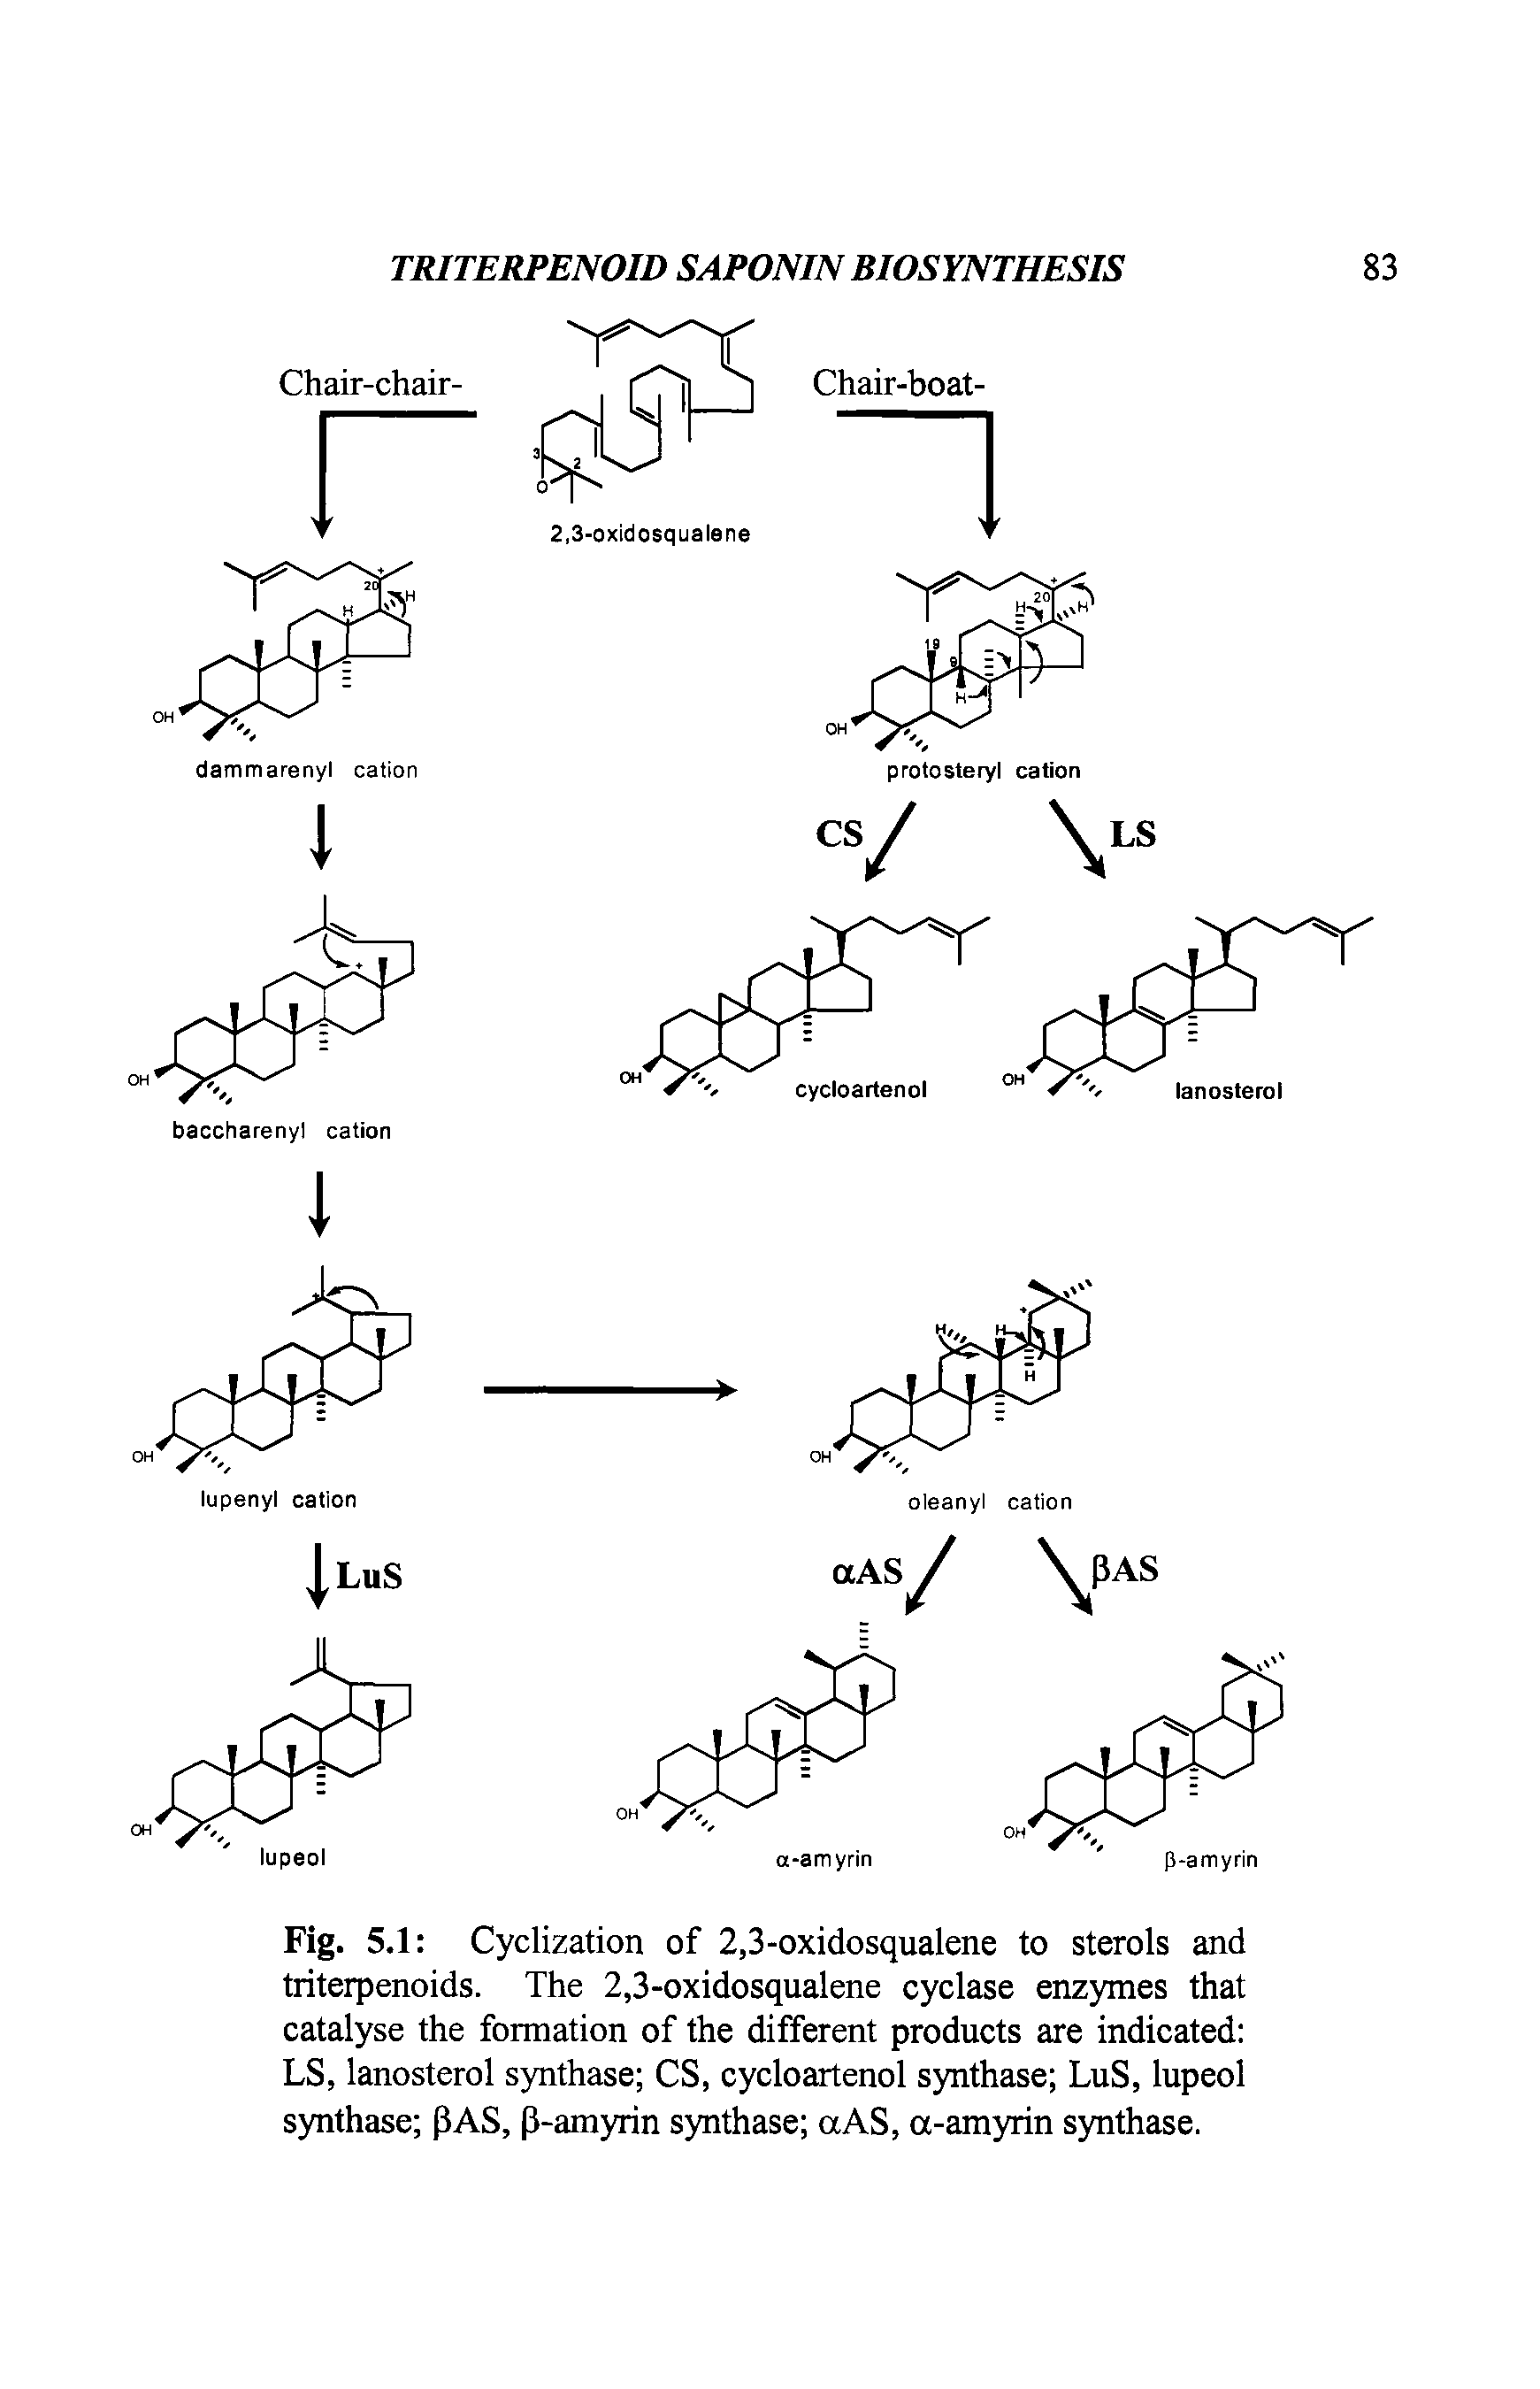 Fig. 5.1 Cyclization of 2,3-oxidosqualene to sterols and triterpenoids. The 2,3-oxidosqualene cyclase enzymes that catalyse the formation of the different products are indicated LS, lanosterol synthase CS, cycloartenol synthase LuS, lupeol synthase PAS, P-amyrin synthase aAS, a-amyrin synthase.